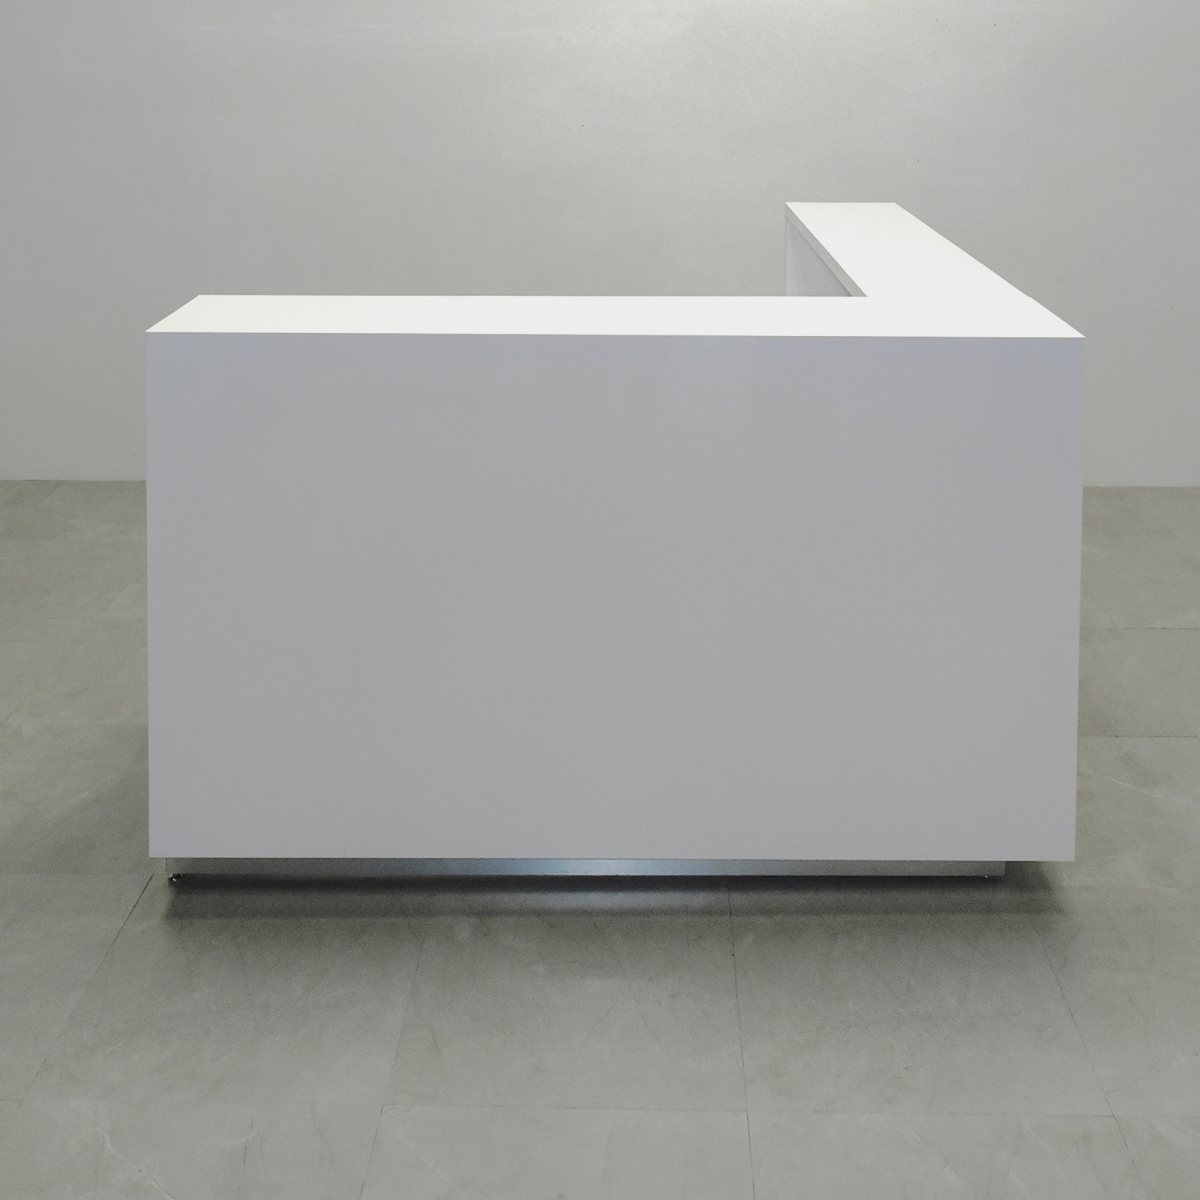 Custom L-Shape Reception Desk in White Gloss, 72 By 72 Inches